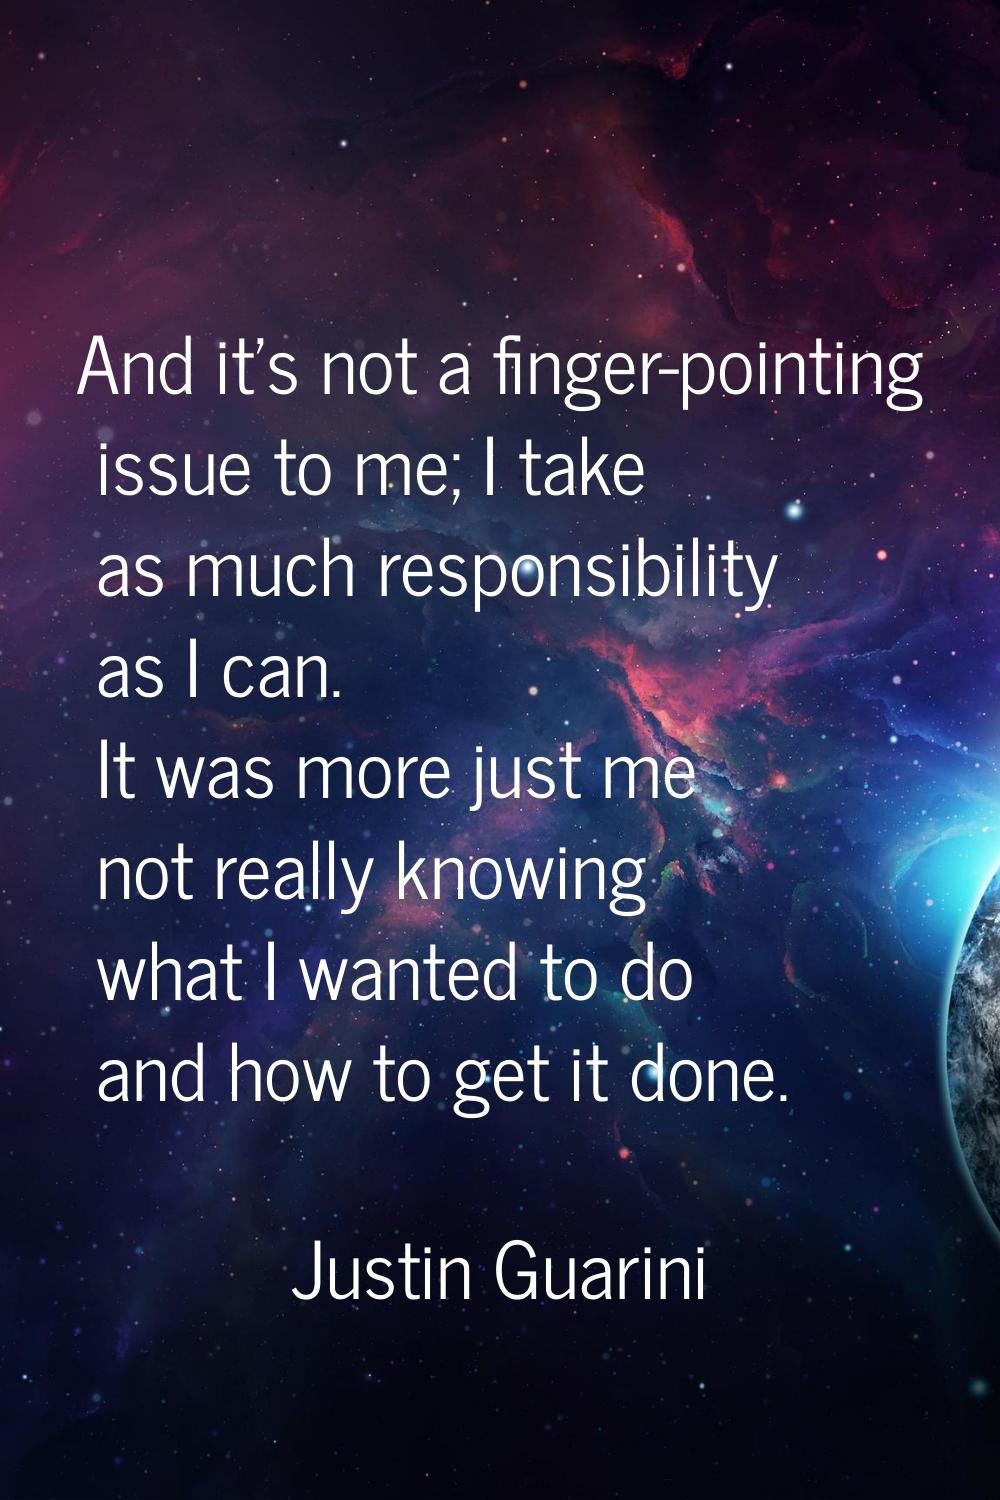 And it's not a finger-pointing issue to me; I take as much responsibility as I can. It was more jus